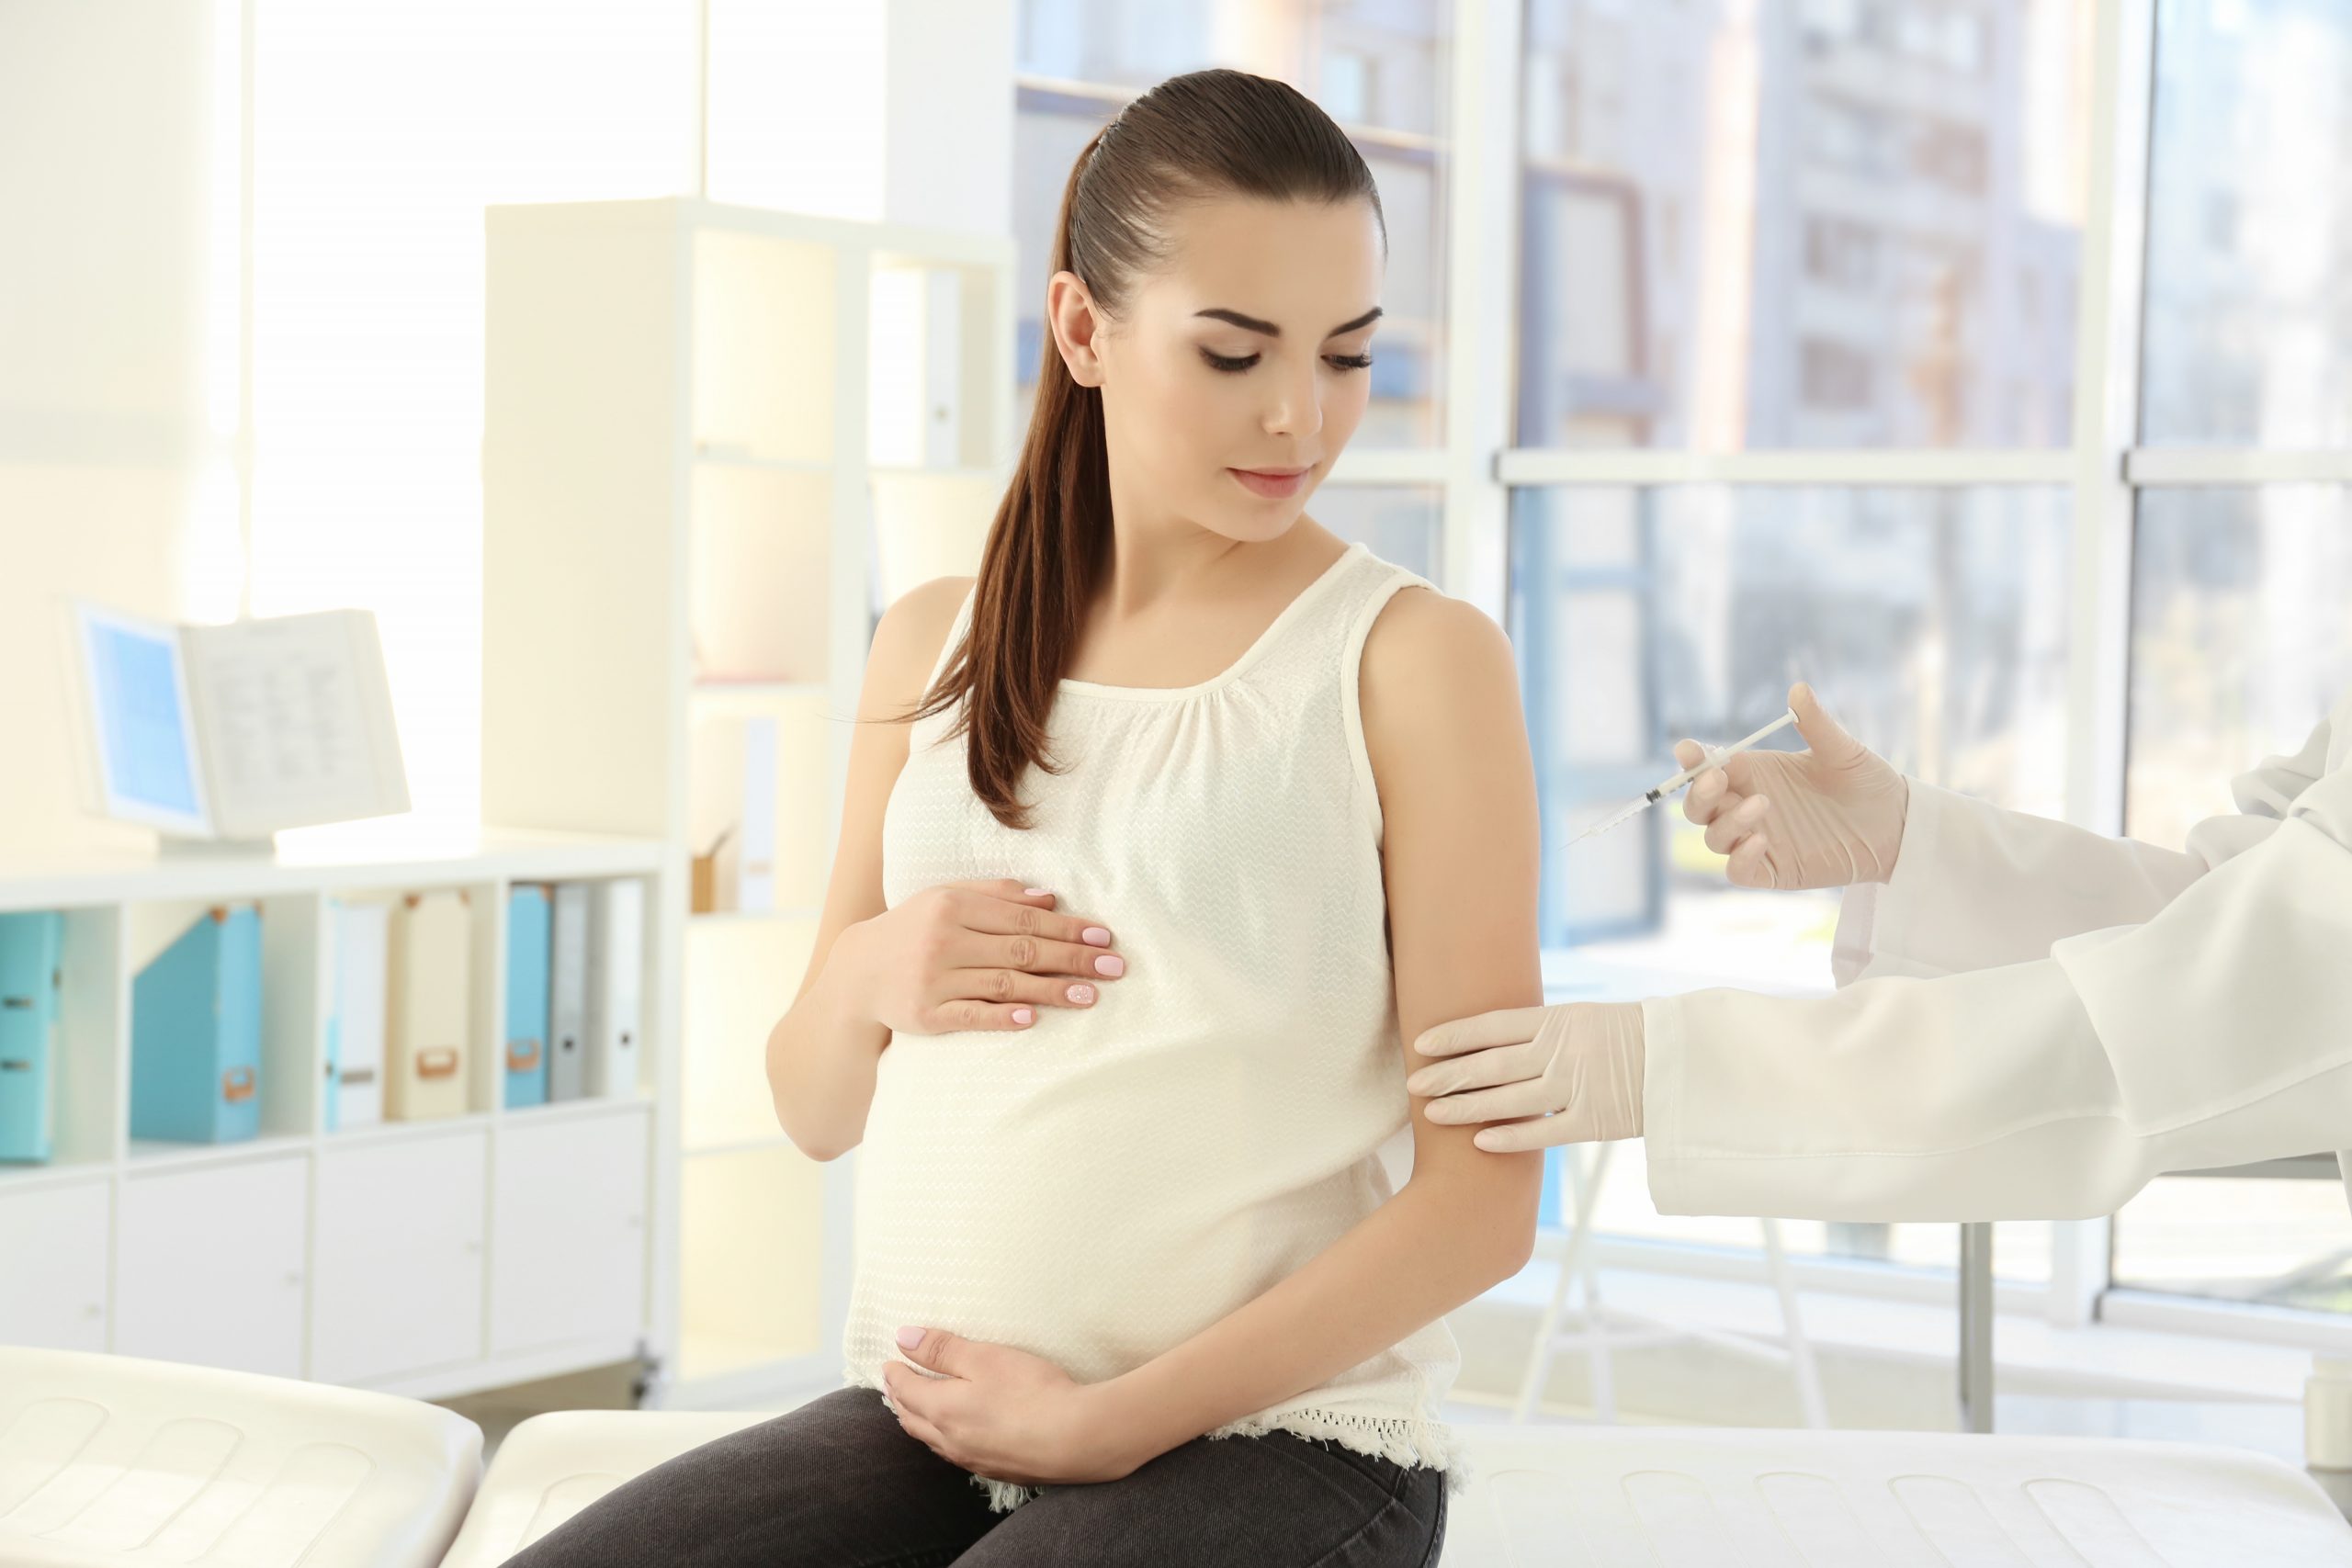 Improving vaccination rates in pregnancy